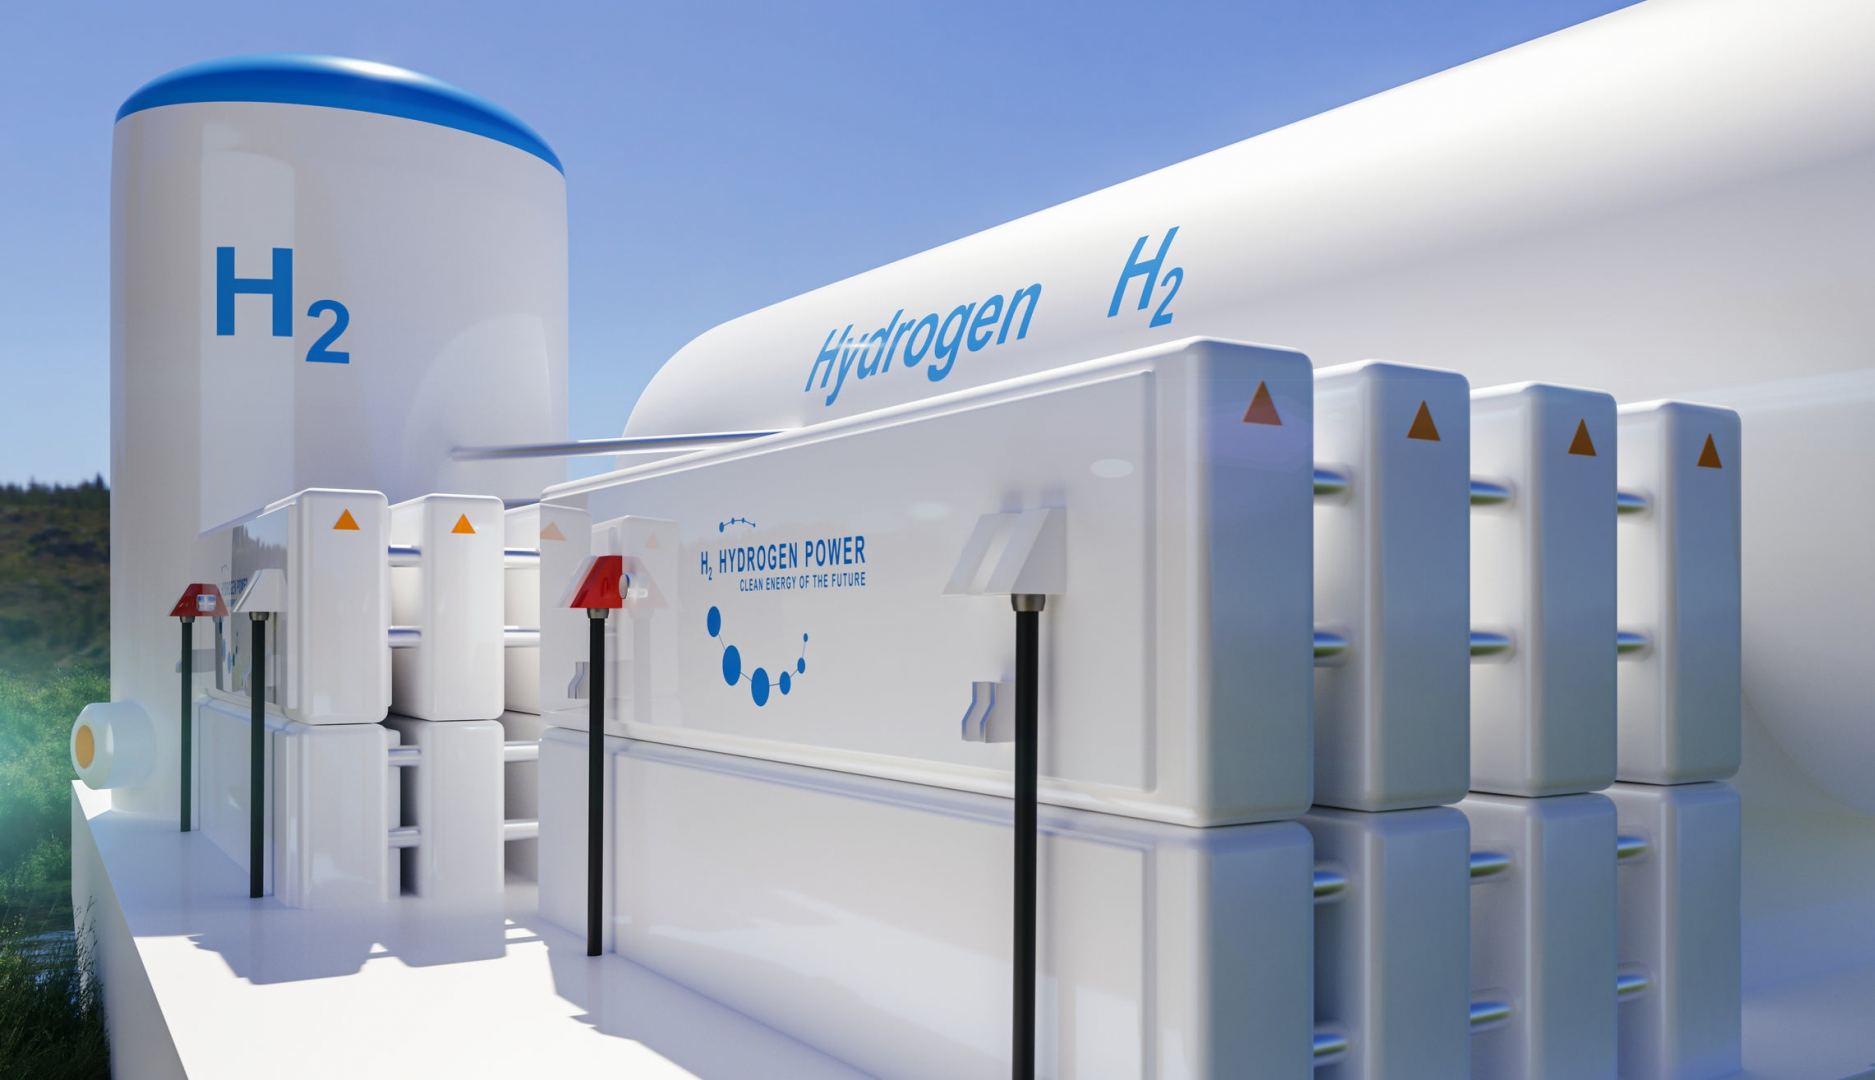 Kenya to be critical partner for Europe in green hydrogen supply - President